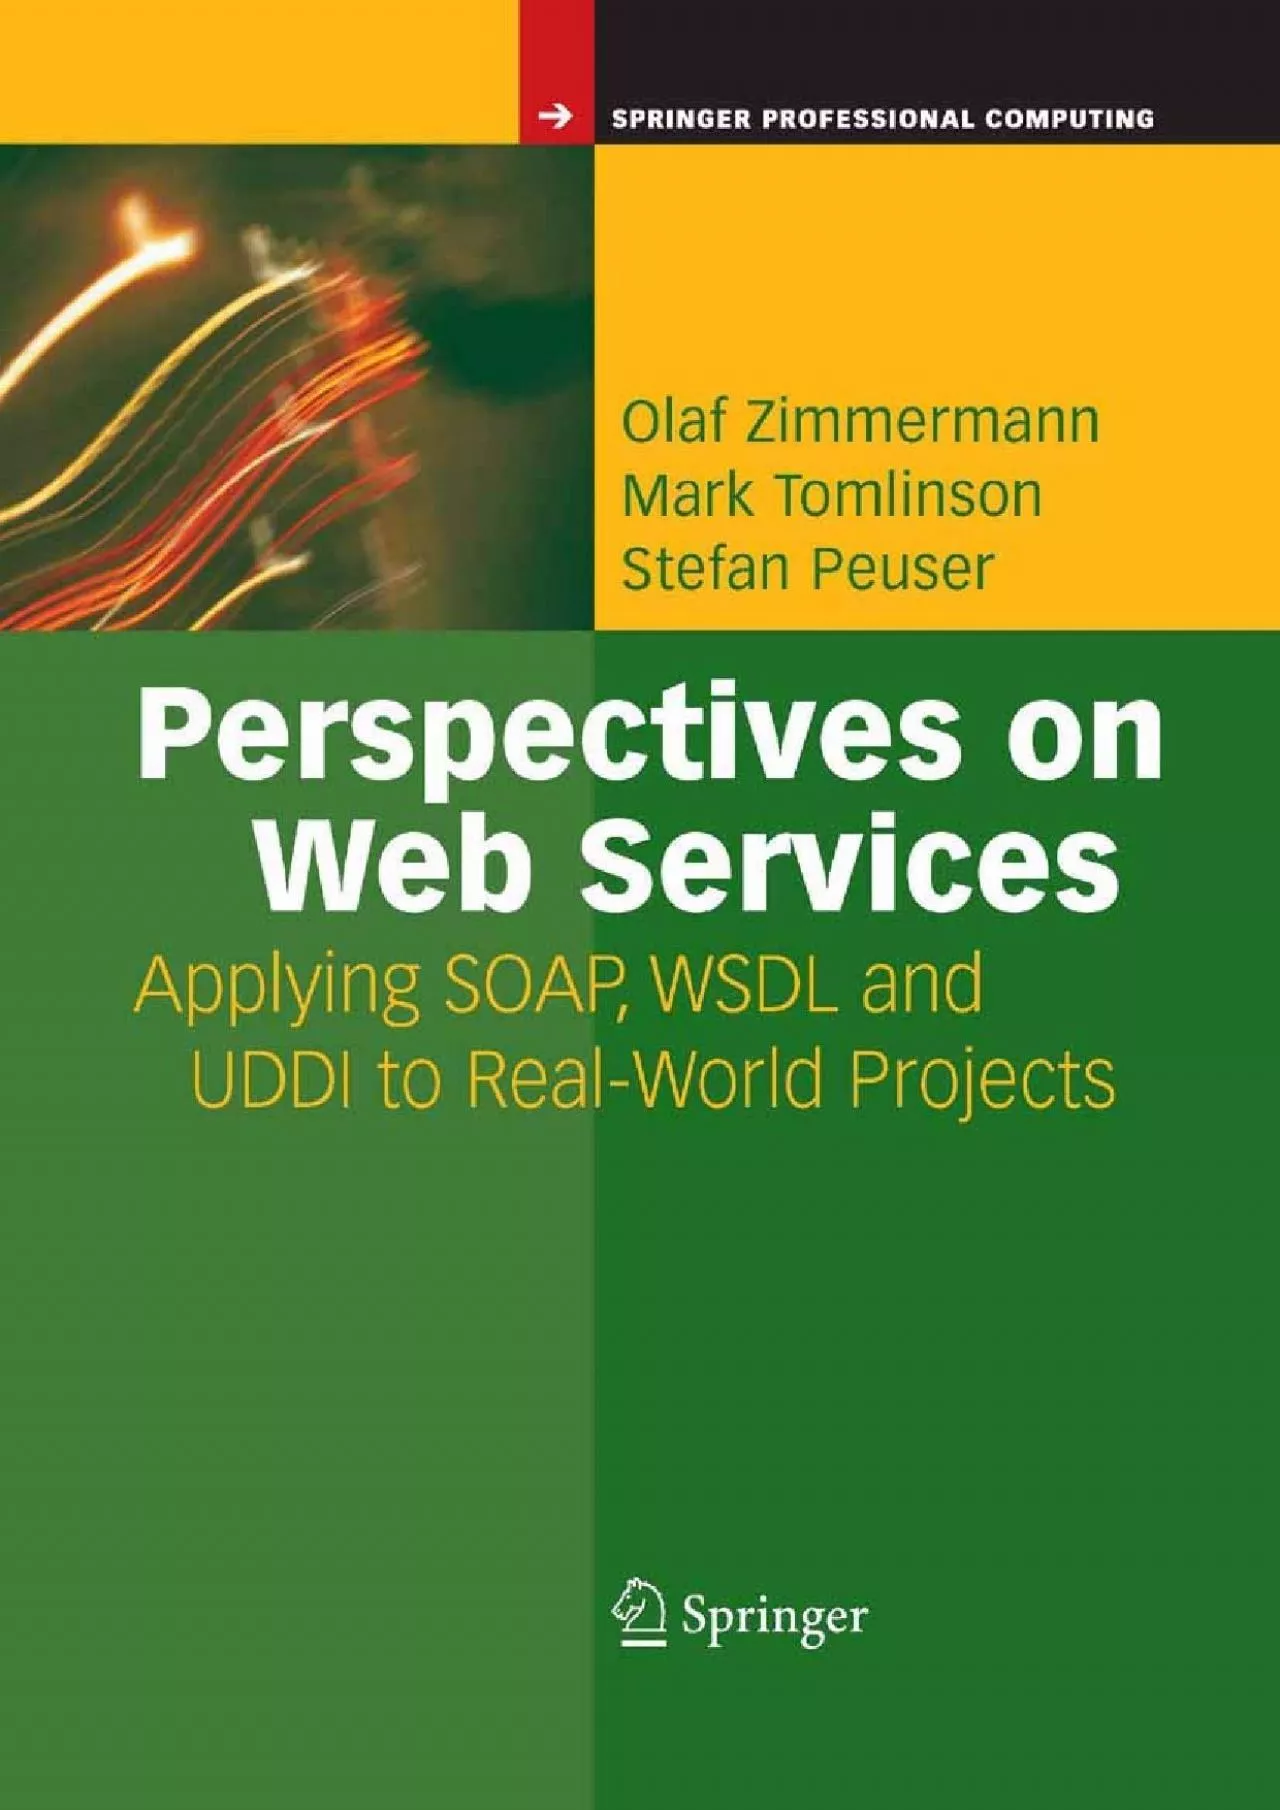 [eBOOK]-Perspectives on Web Services: Applying SOAP, WSDL and UDDI to Real-World Projects